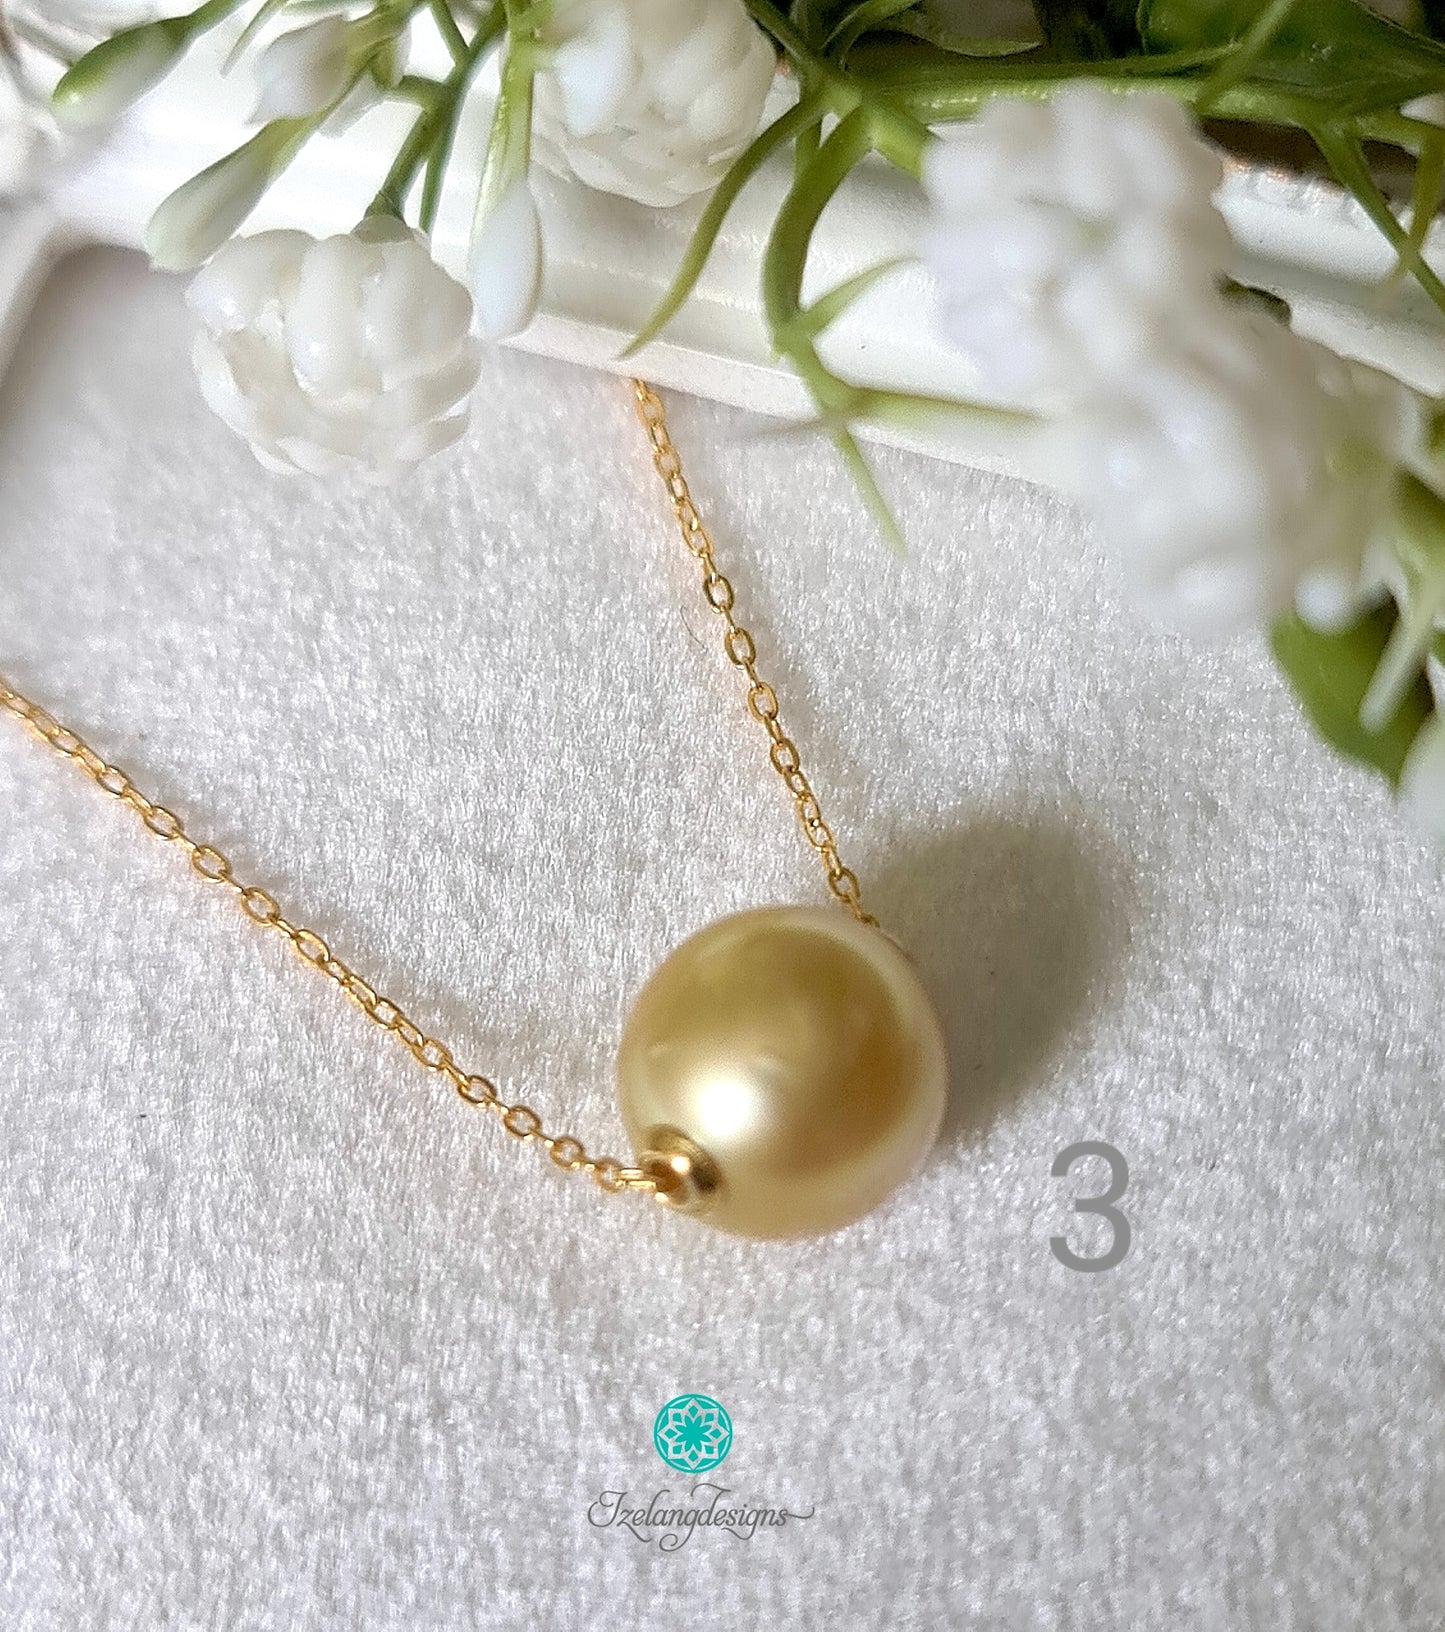 11-12mm Golden South Sea Pearls in 925 Sterling Silver gold plated Chain-NEM015